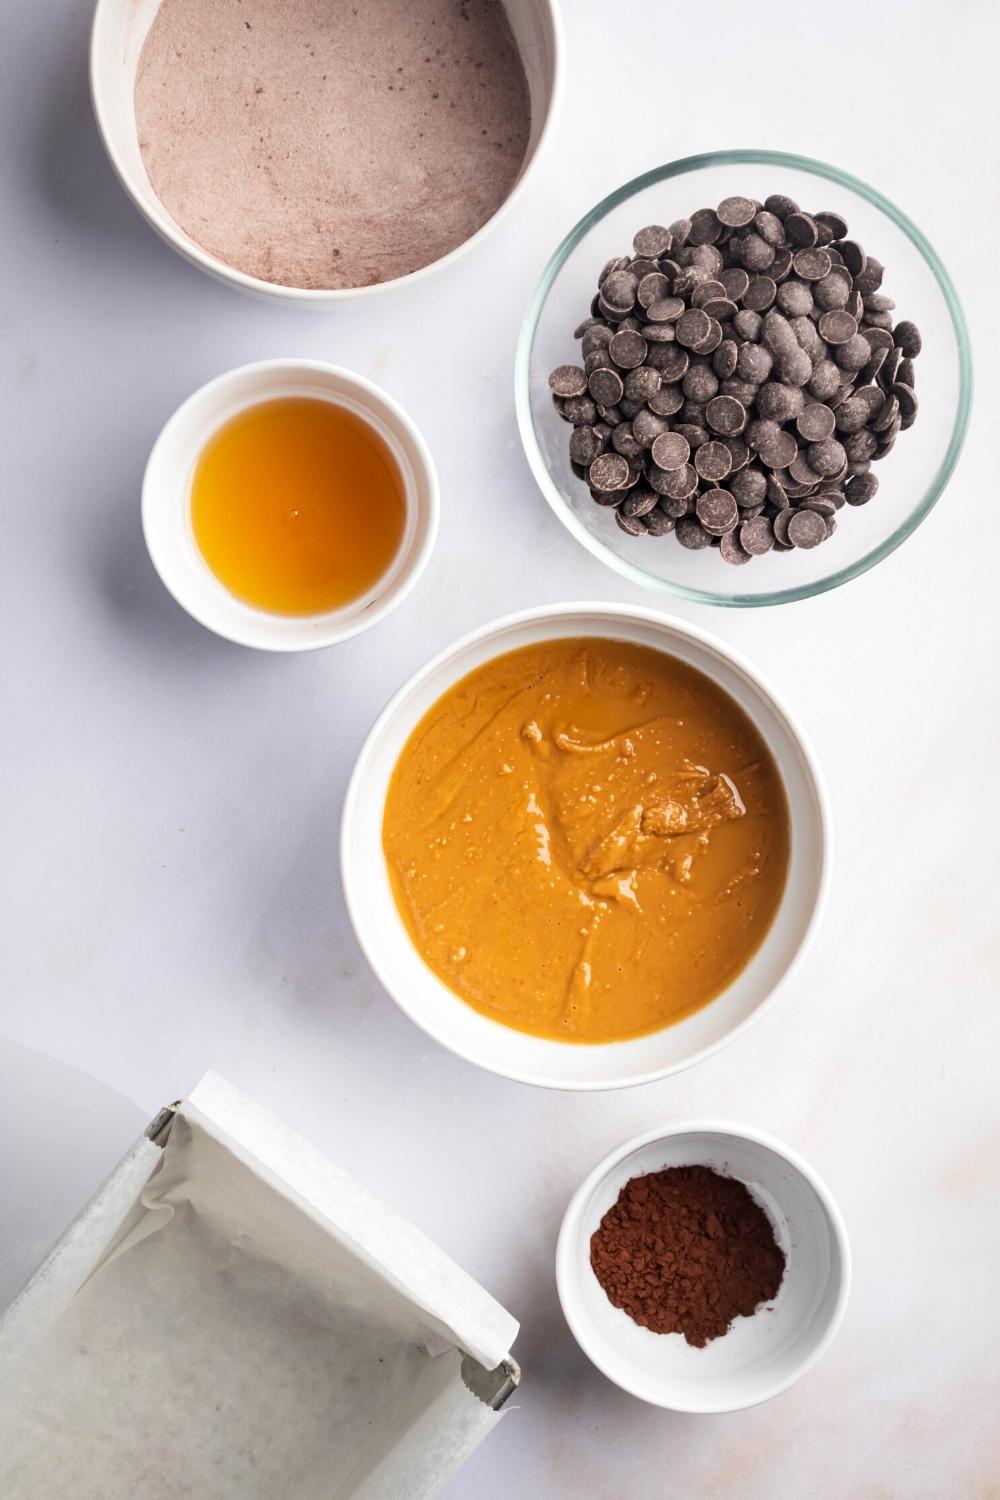 A bowl of protein powder, a bowl of chocolate chips, a small bowl of maple syrup, a bowl of peanut butter, and a small bowl of cocoa powder all on a white counter.